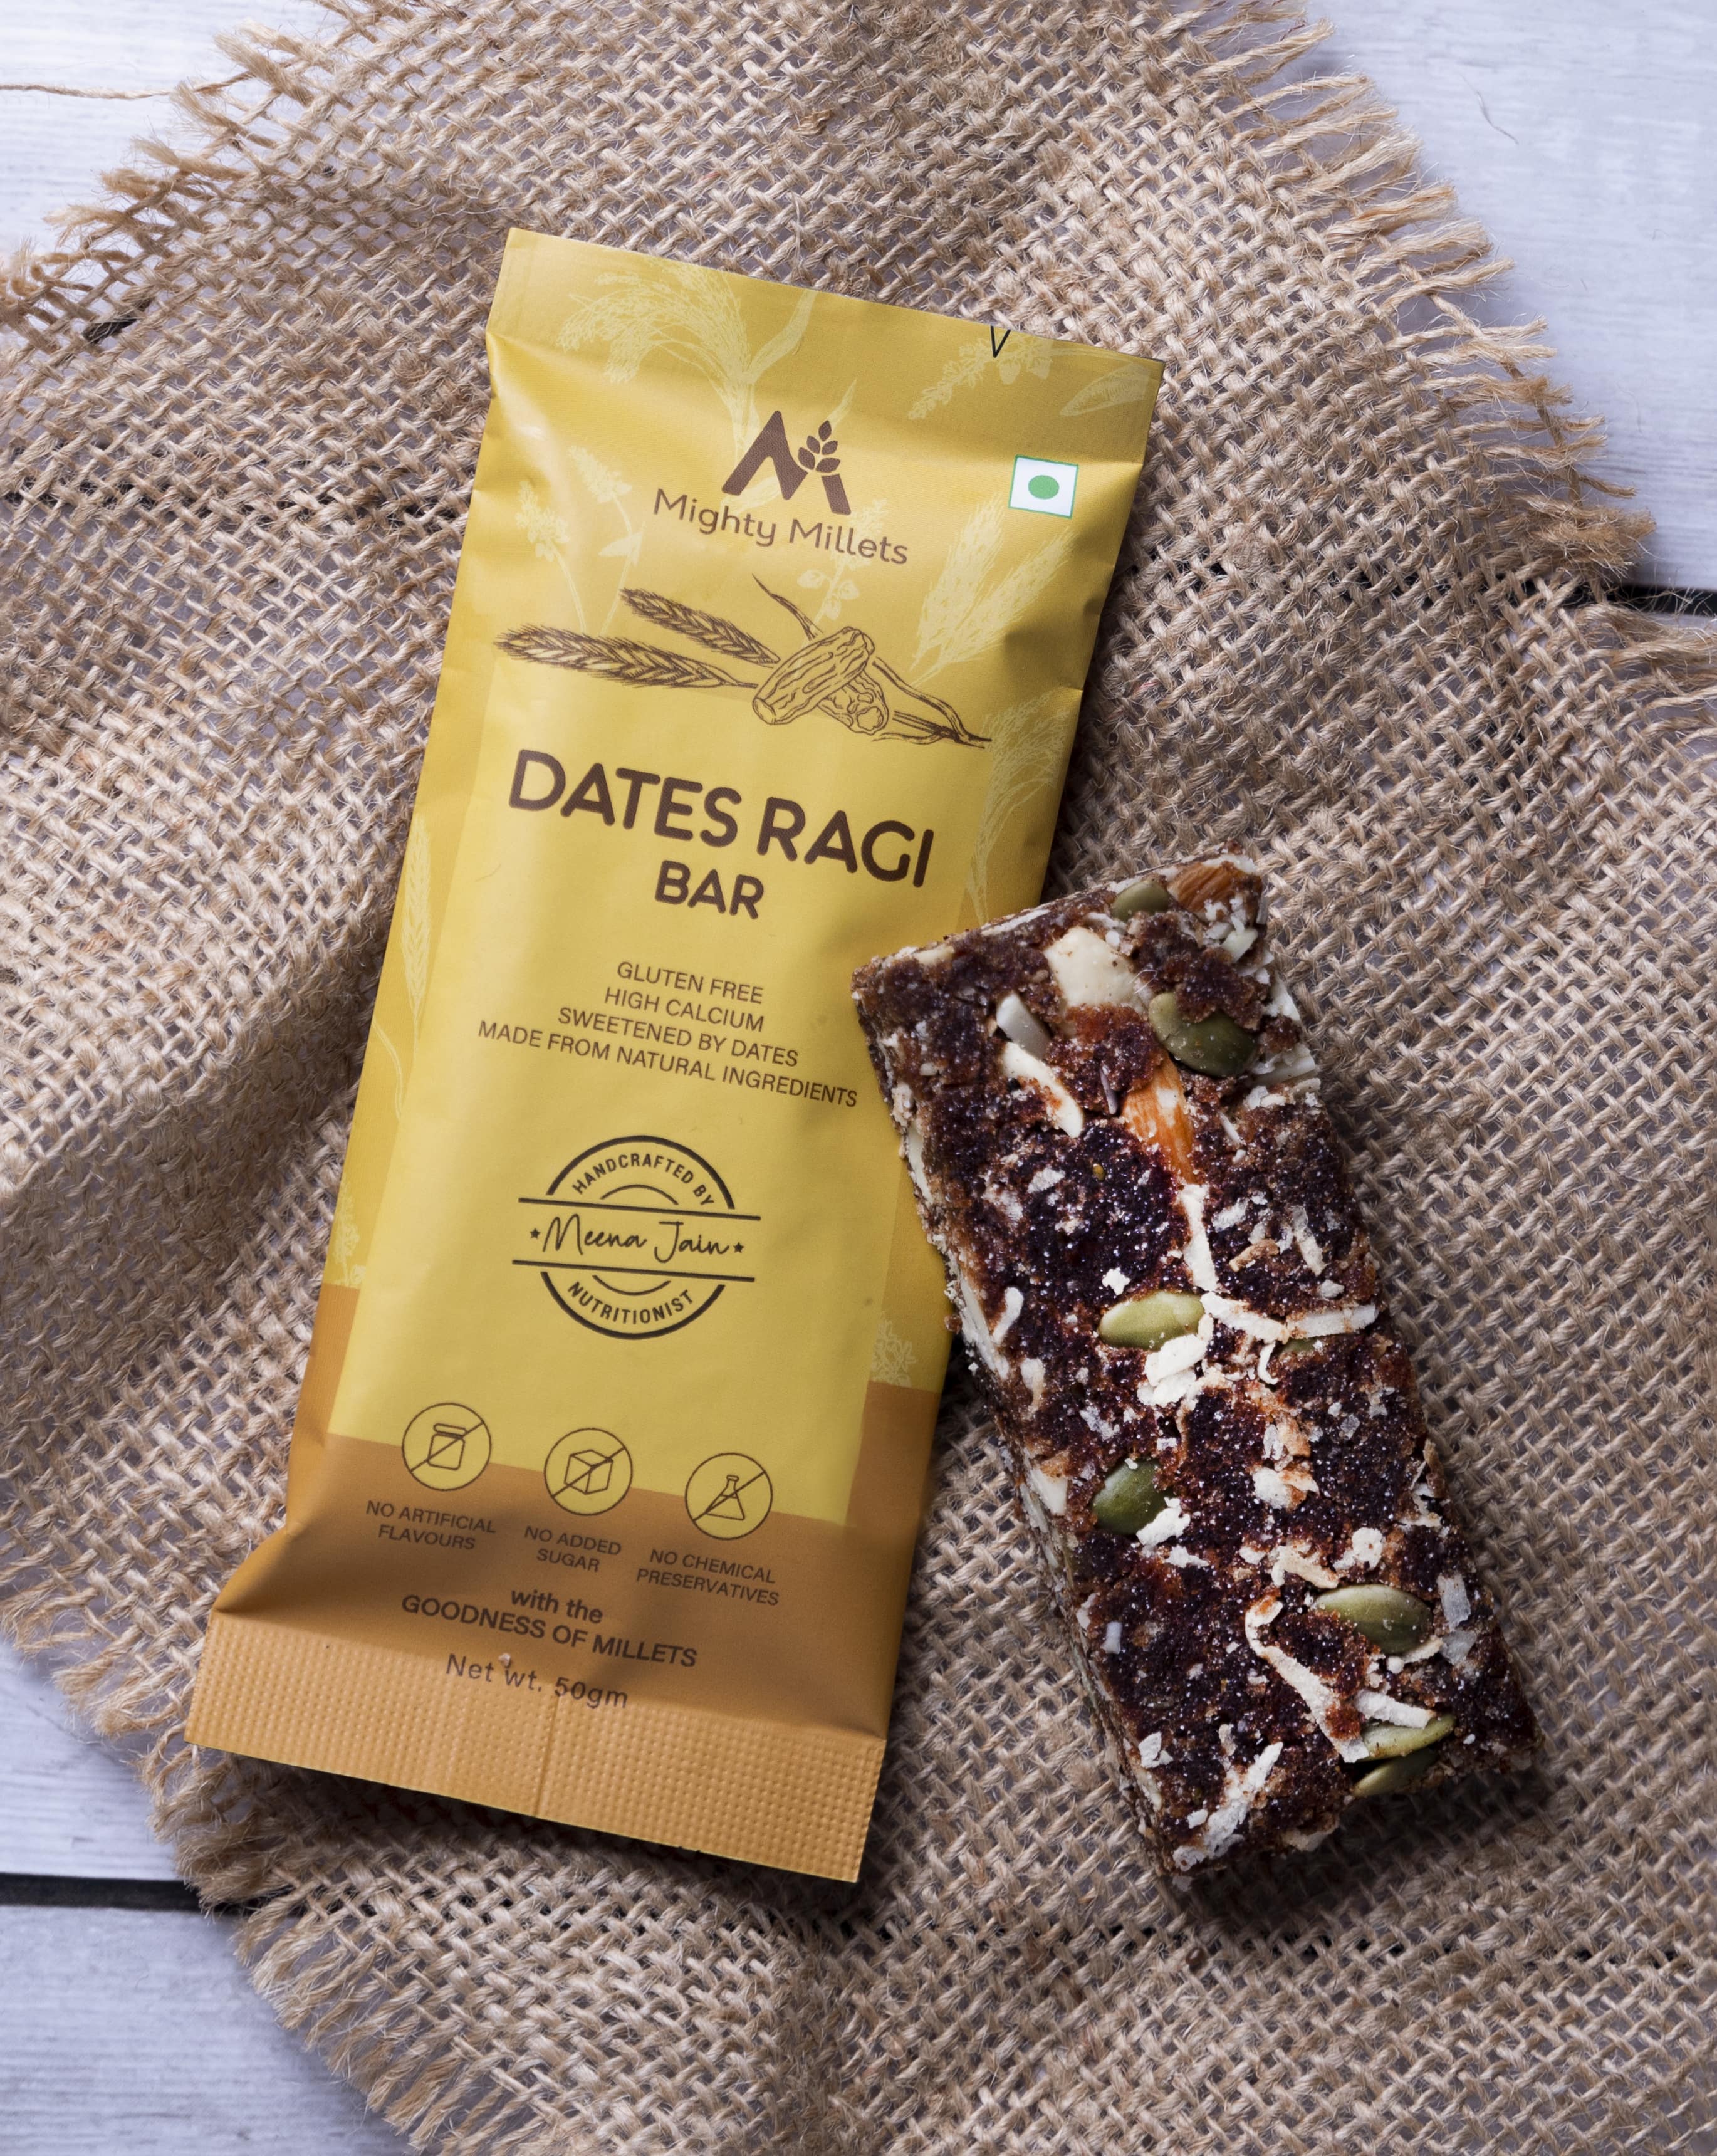 Mighty Millets Dates Ragi Bar | Pack of 4 | 4x50g